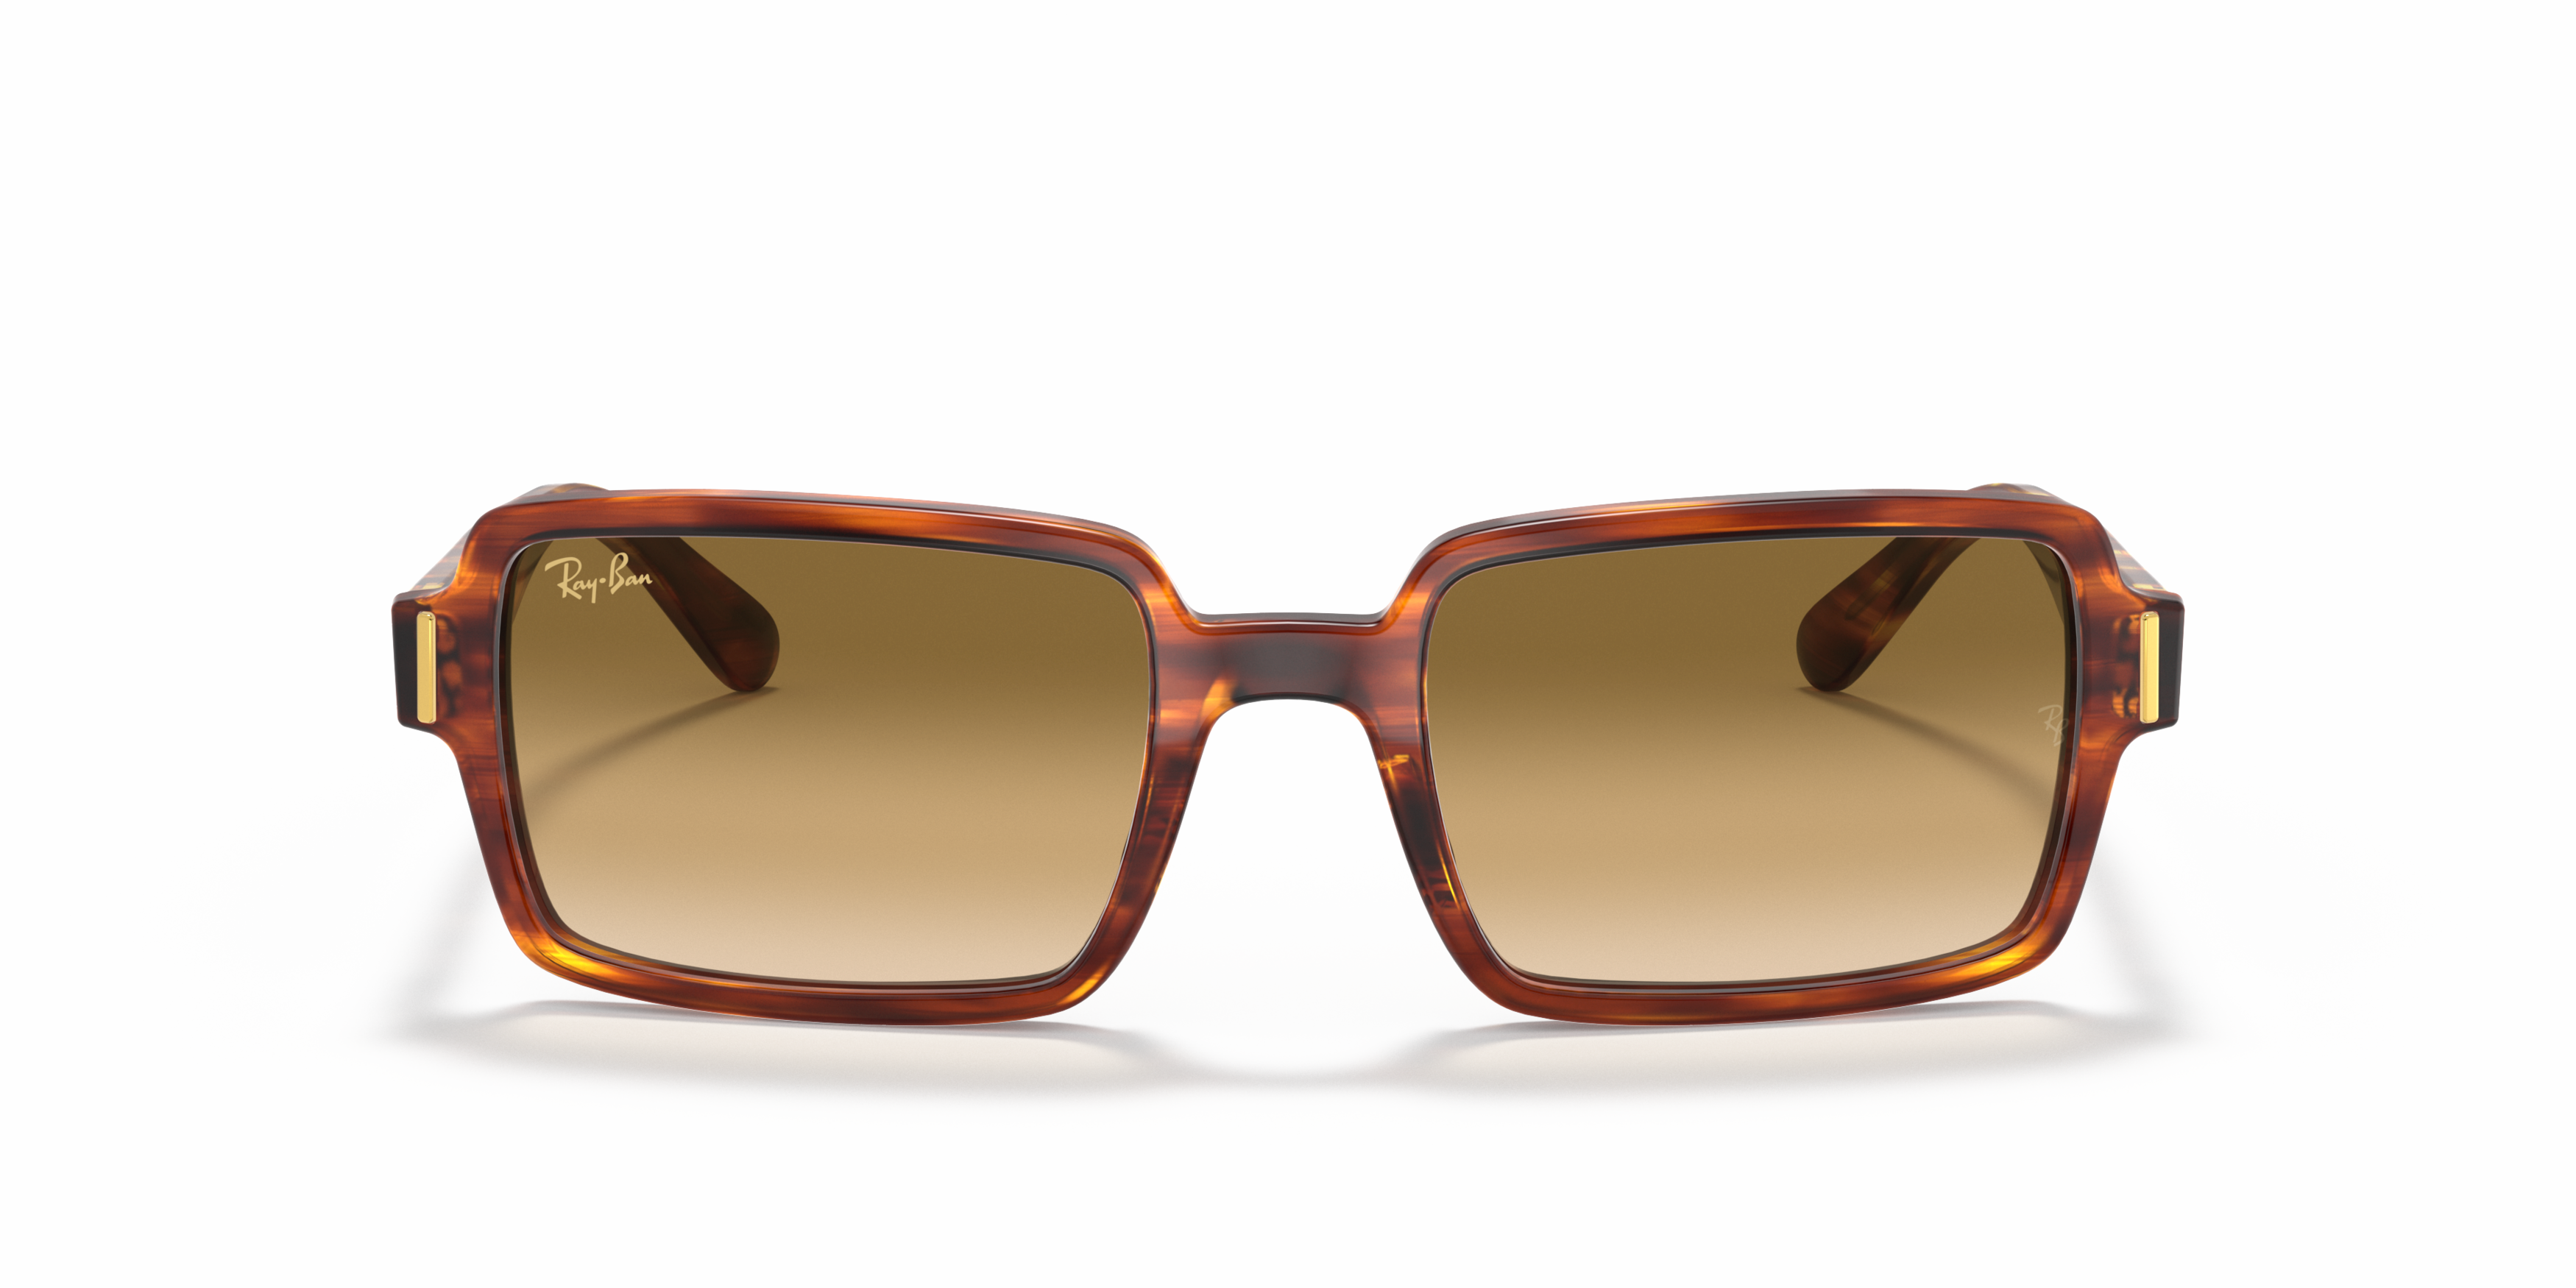 [products.image.front] Ray-Ban RB2189 954/51